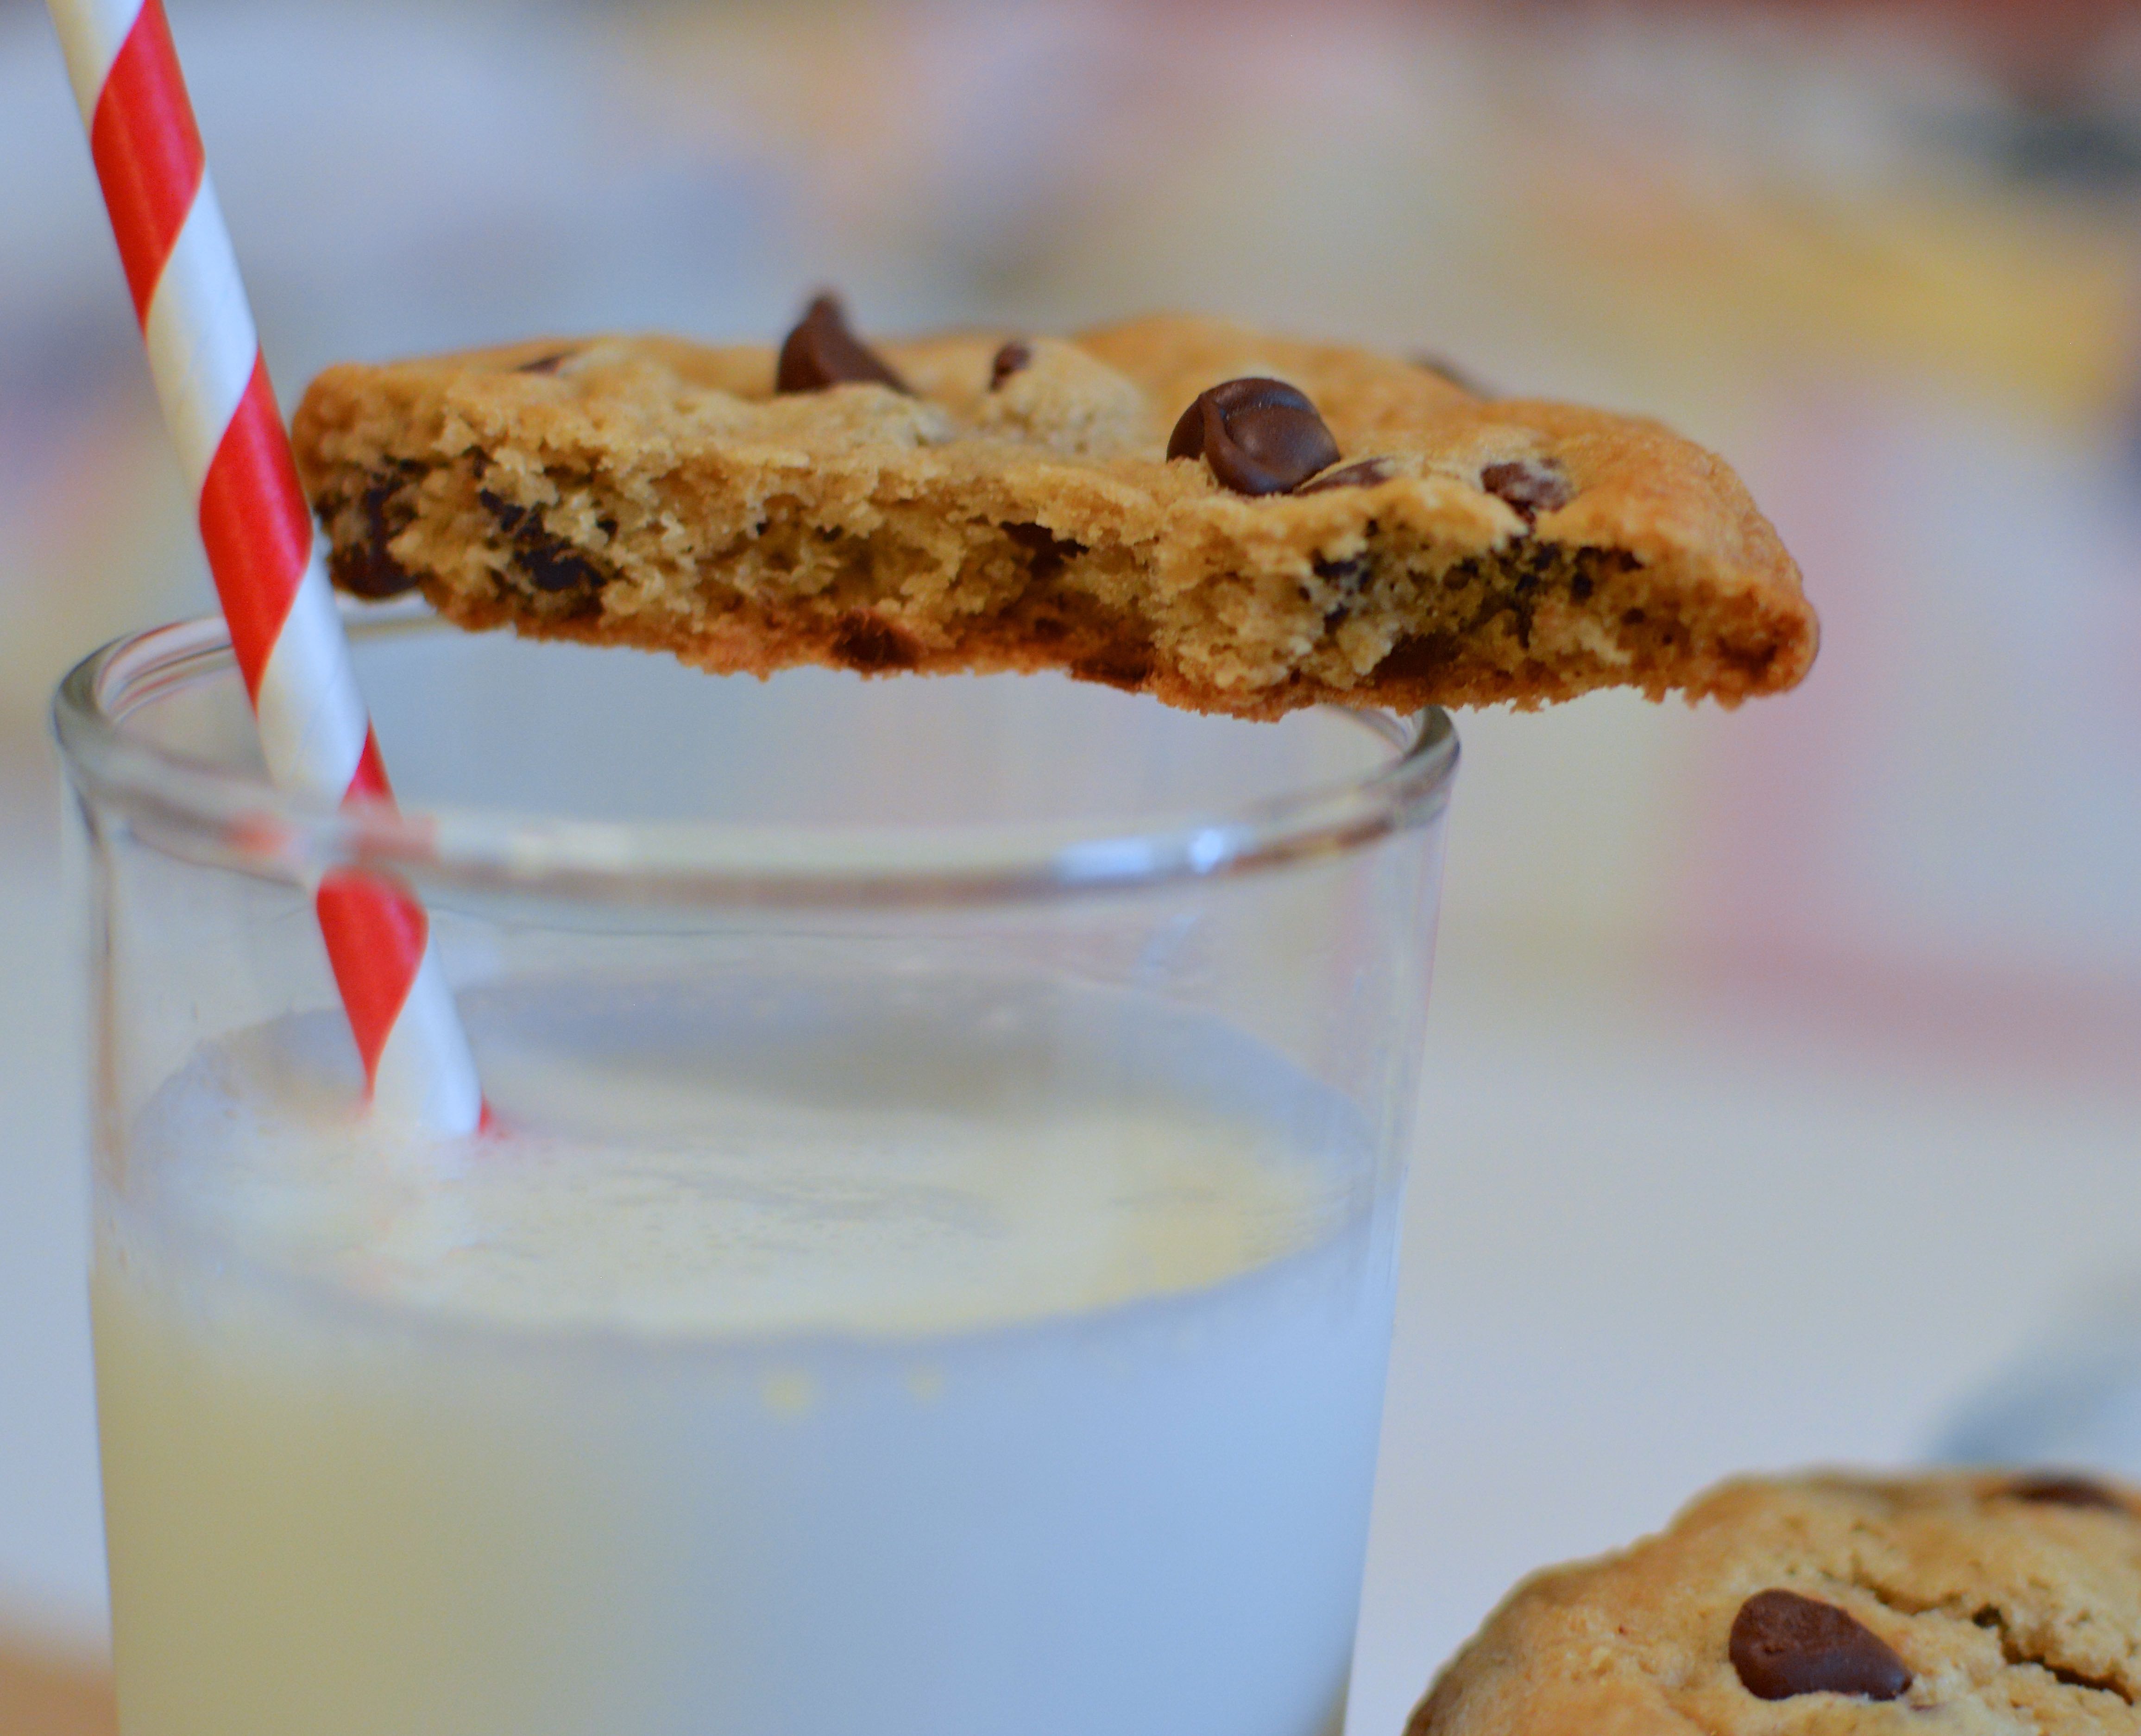 chocolate-chip-cookies-3